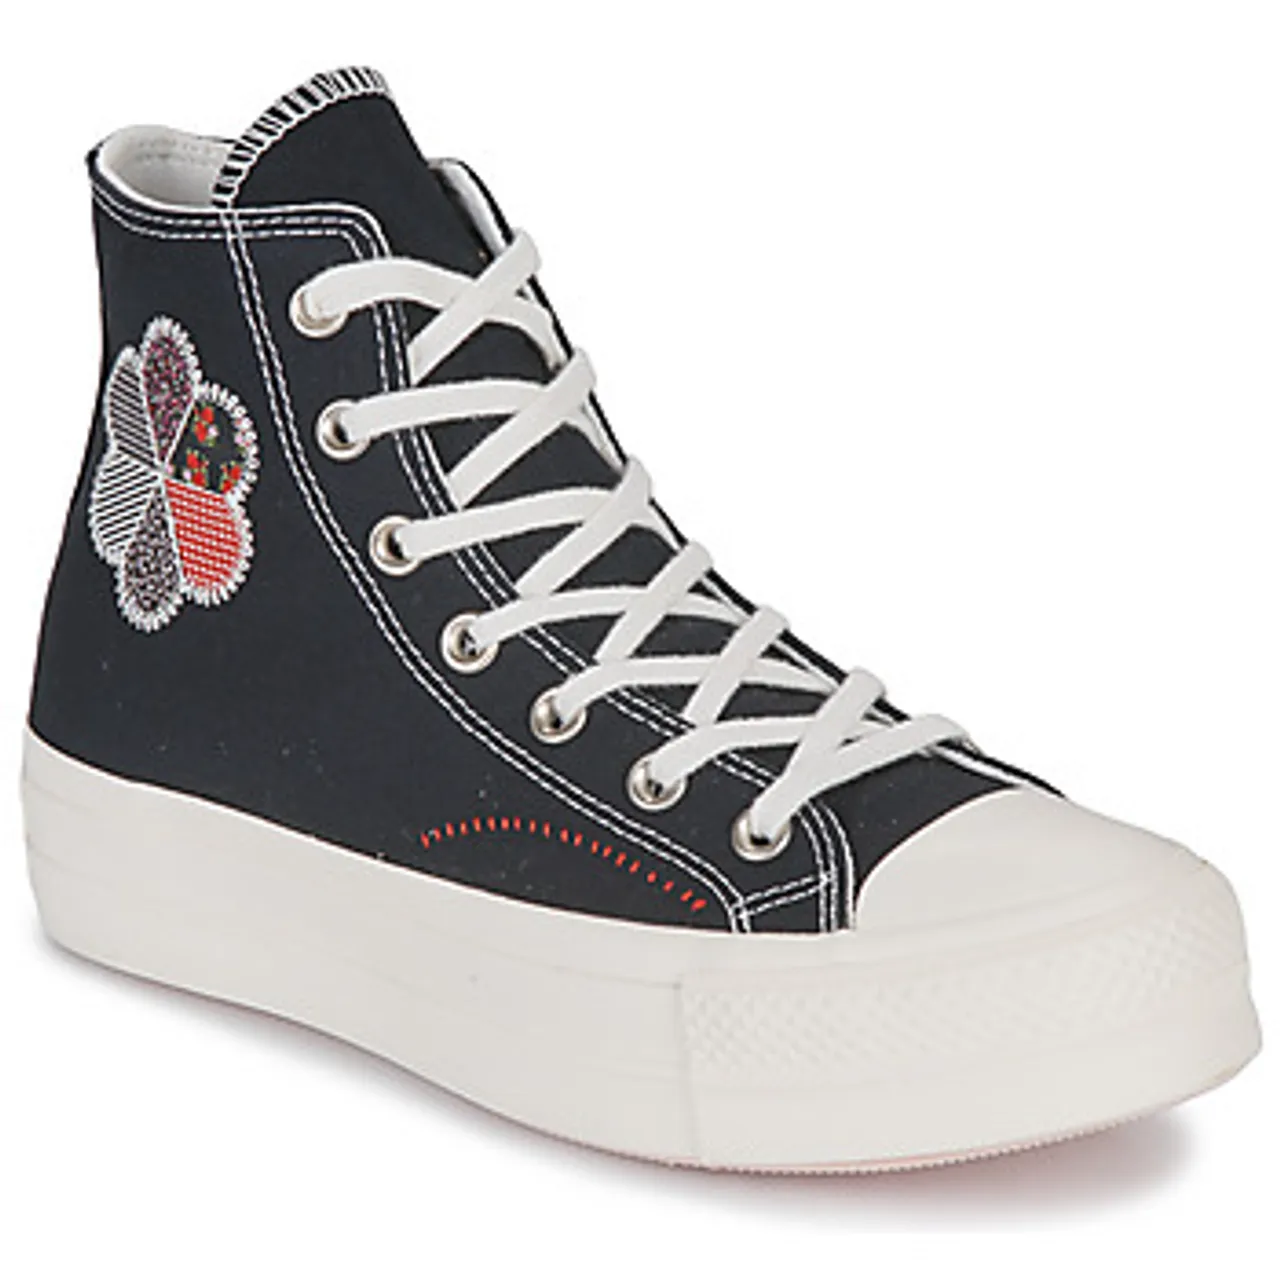 Converse  CHUCK TAYLOR ALL STAR LIFT HI  women's Shoes (High-top Trainers) in Black